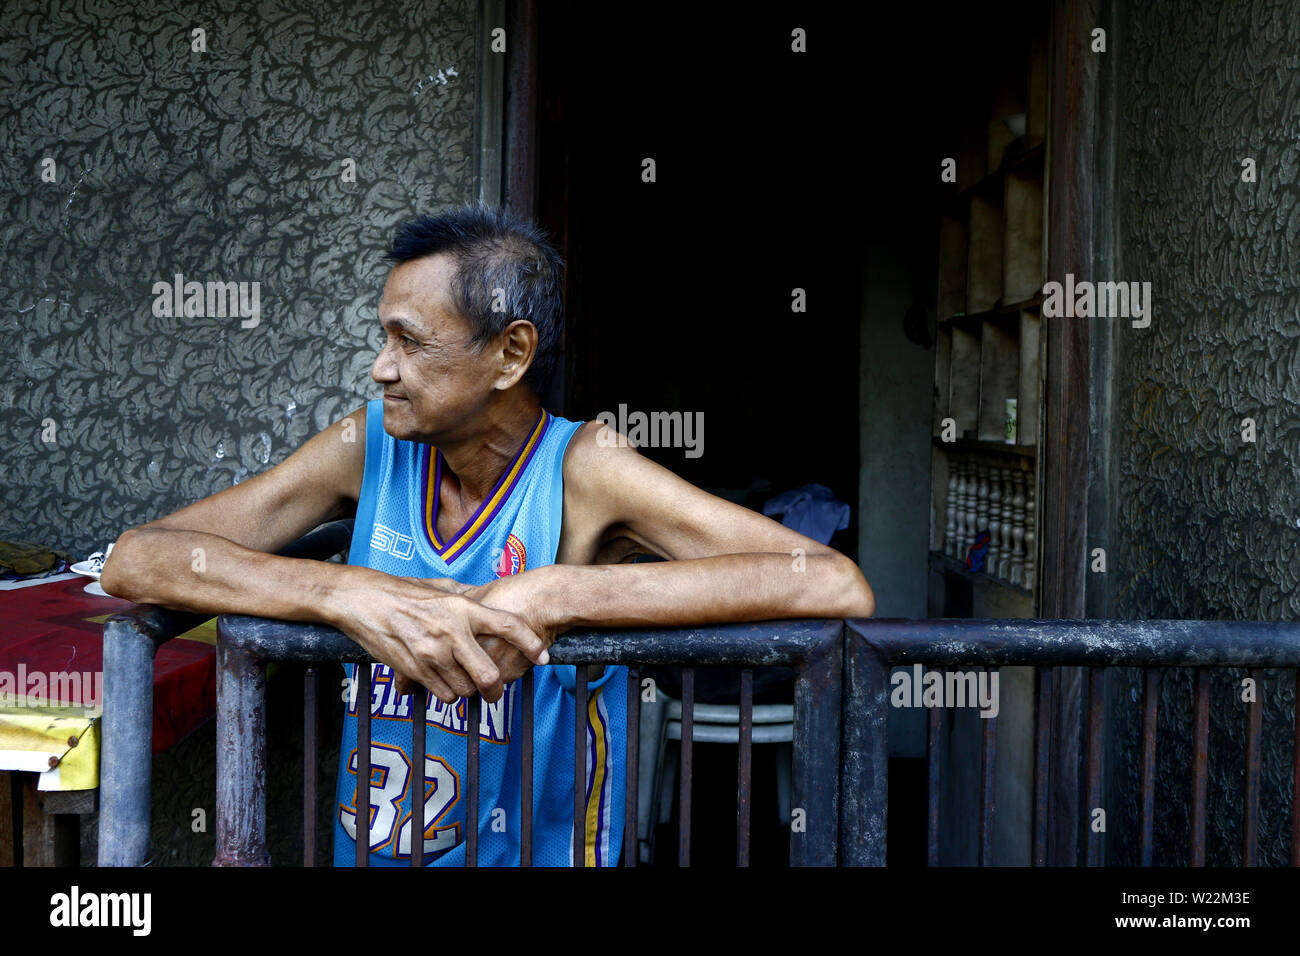 Antipolo City Philippines July 3 2019 A Mature Filipino Man Stands